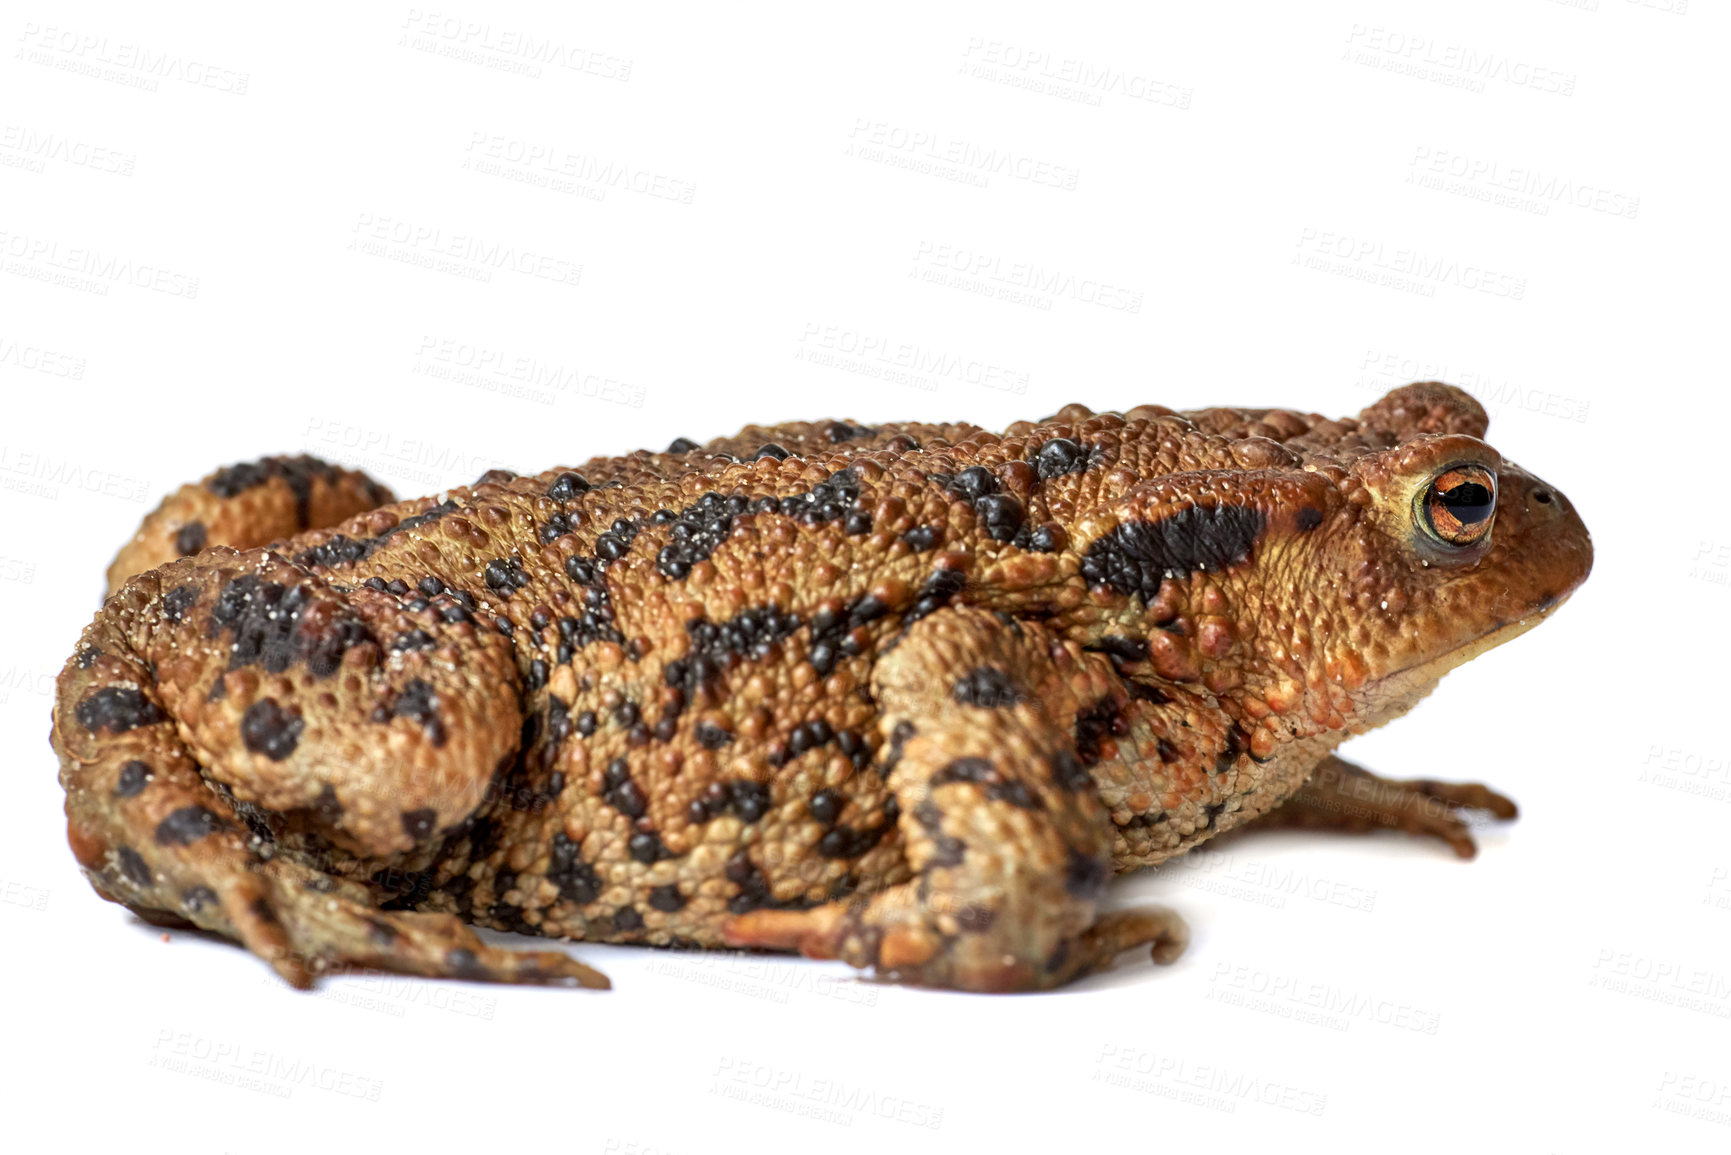 Buy stock photo Common true toad or frog with brown body and black dot markings on dry rough skin isolated on a white background with copyspace. Amphibian from the bufonidae species ready to hop around and croak